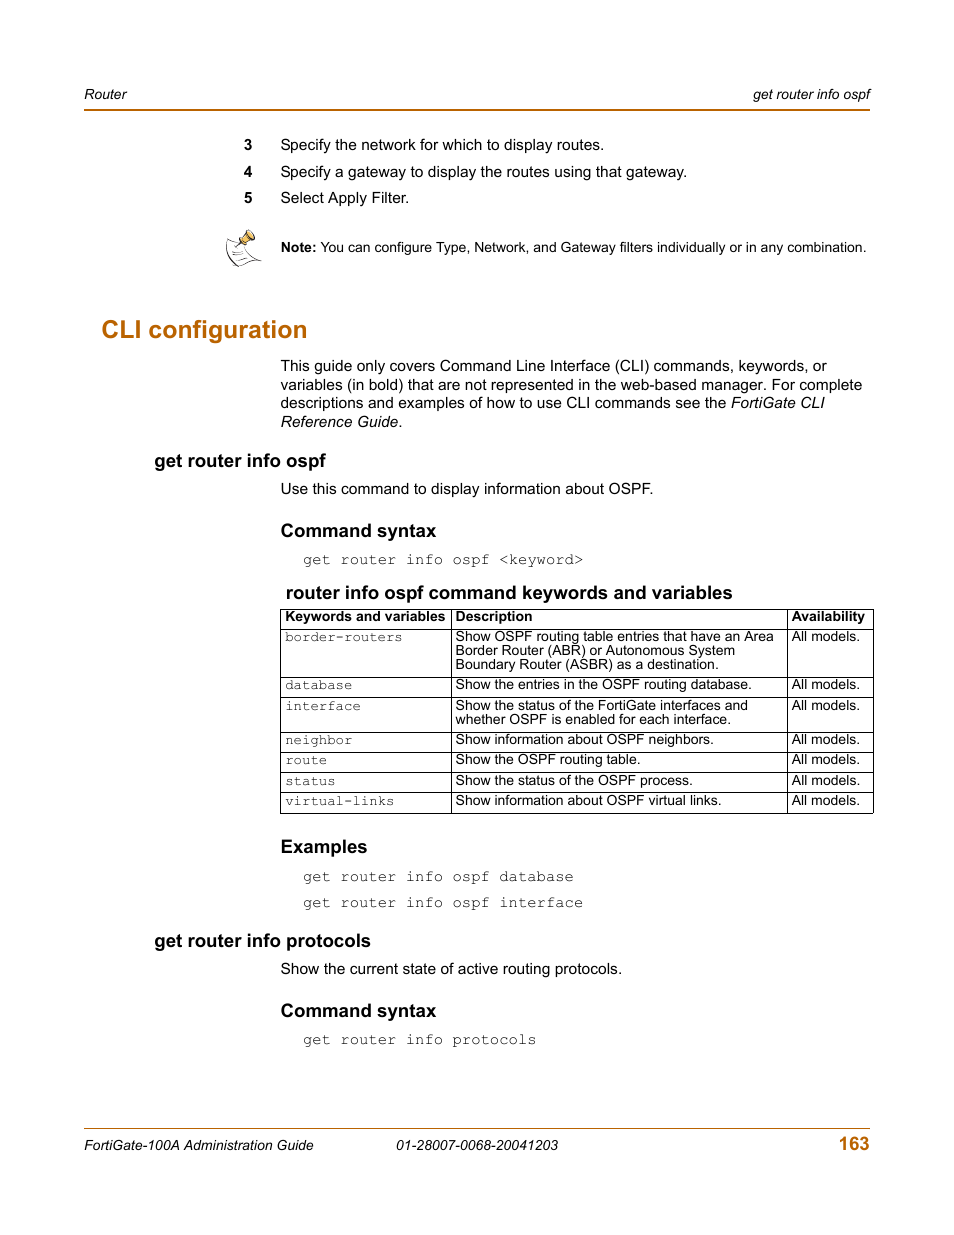 Cli configuration, Get router info ospf, Command syntax | Fortinet 100A  User Manual | Page 163 / 374